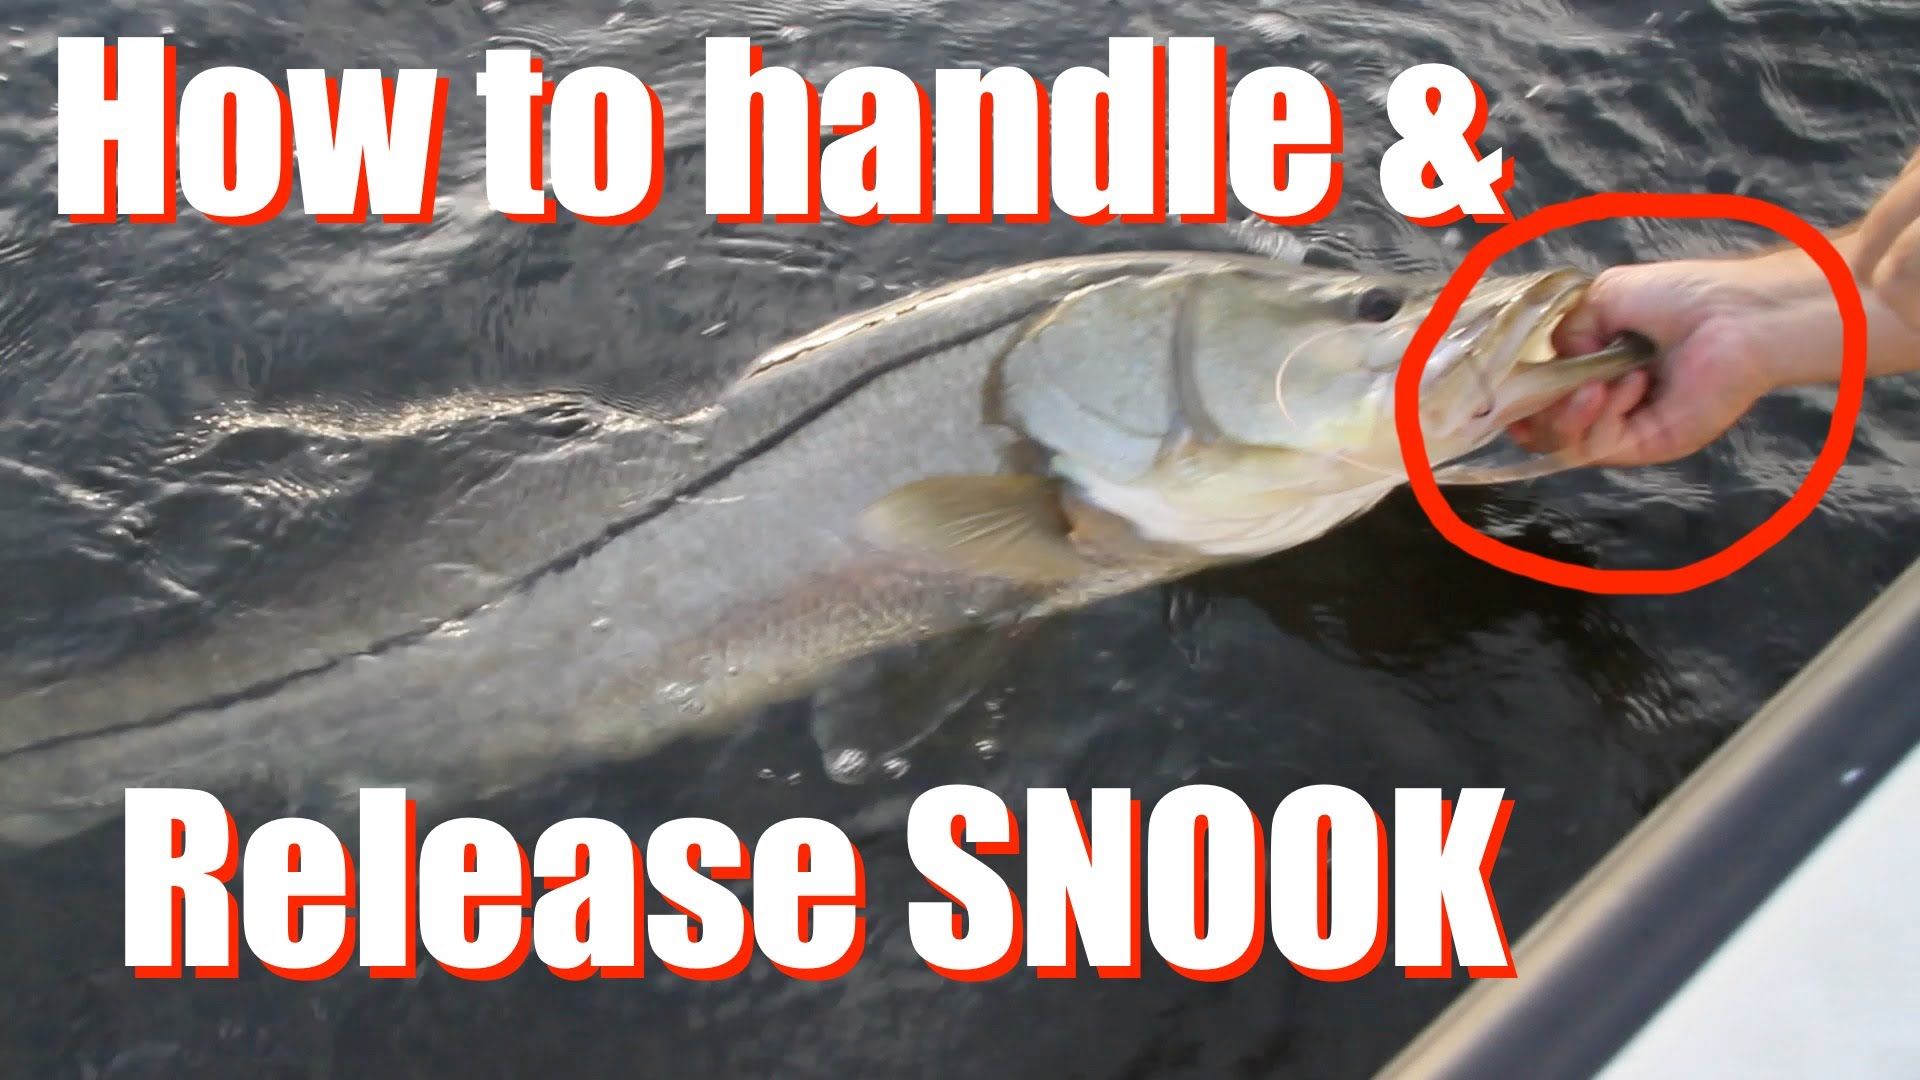 How To Handle and Release Snook - YouTube